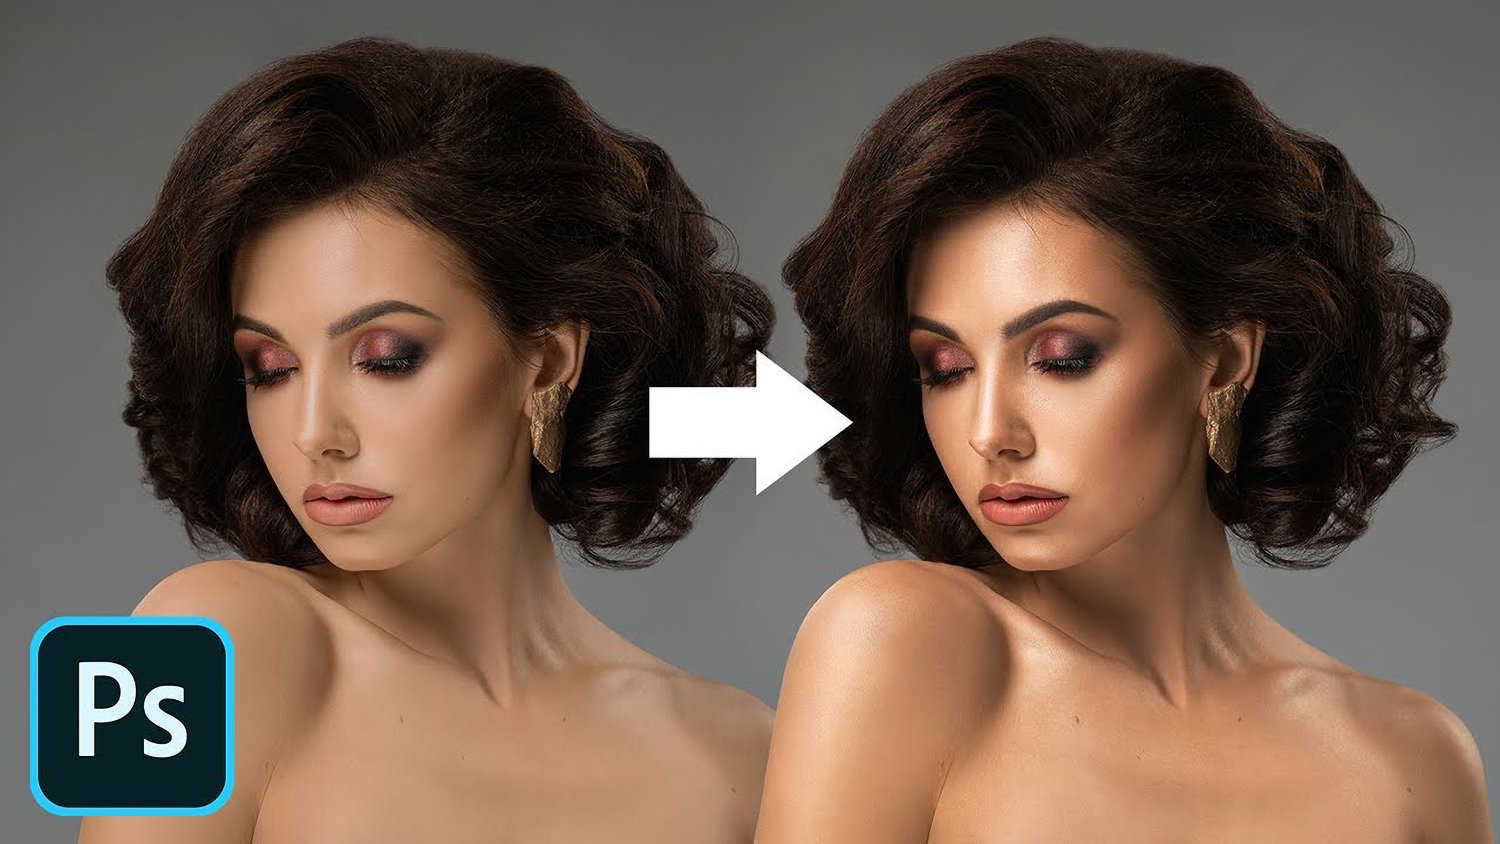 5 Easy Photoshop Tutorials with Professional Results